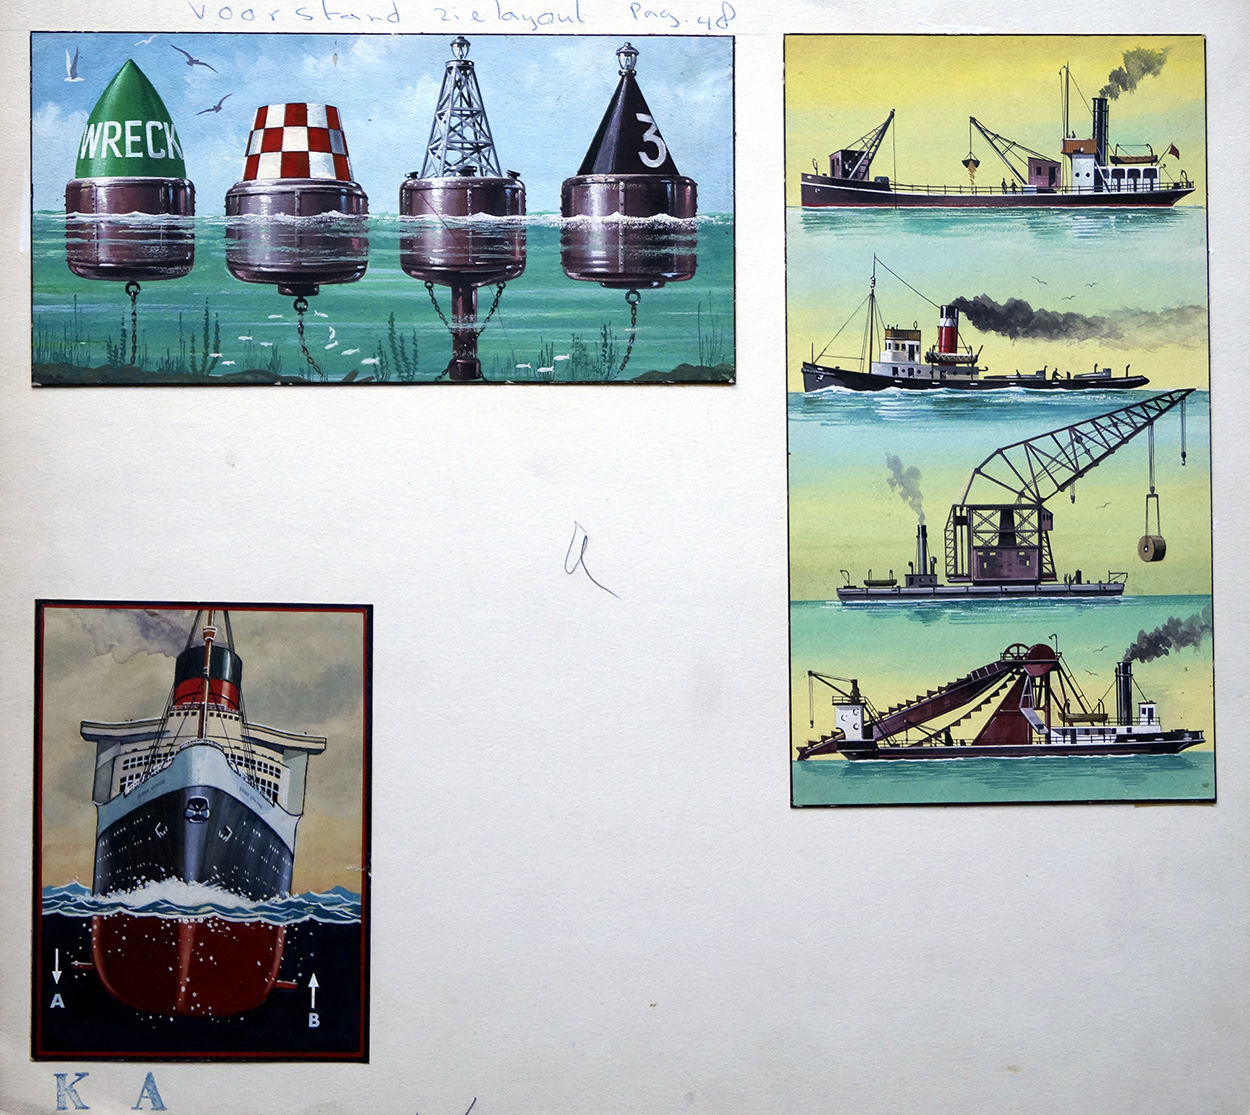 Eagle Cut away - Ship Safety - Buoys and Ballast (Original) art by Walkden Fisher at The Illustration Art Gallery